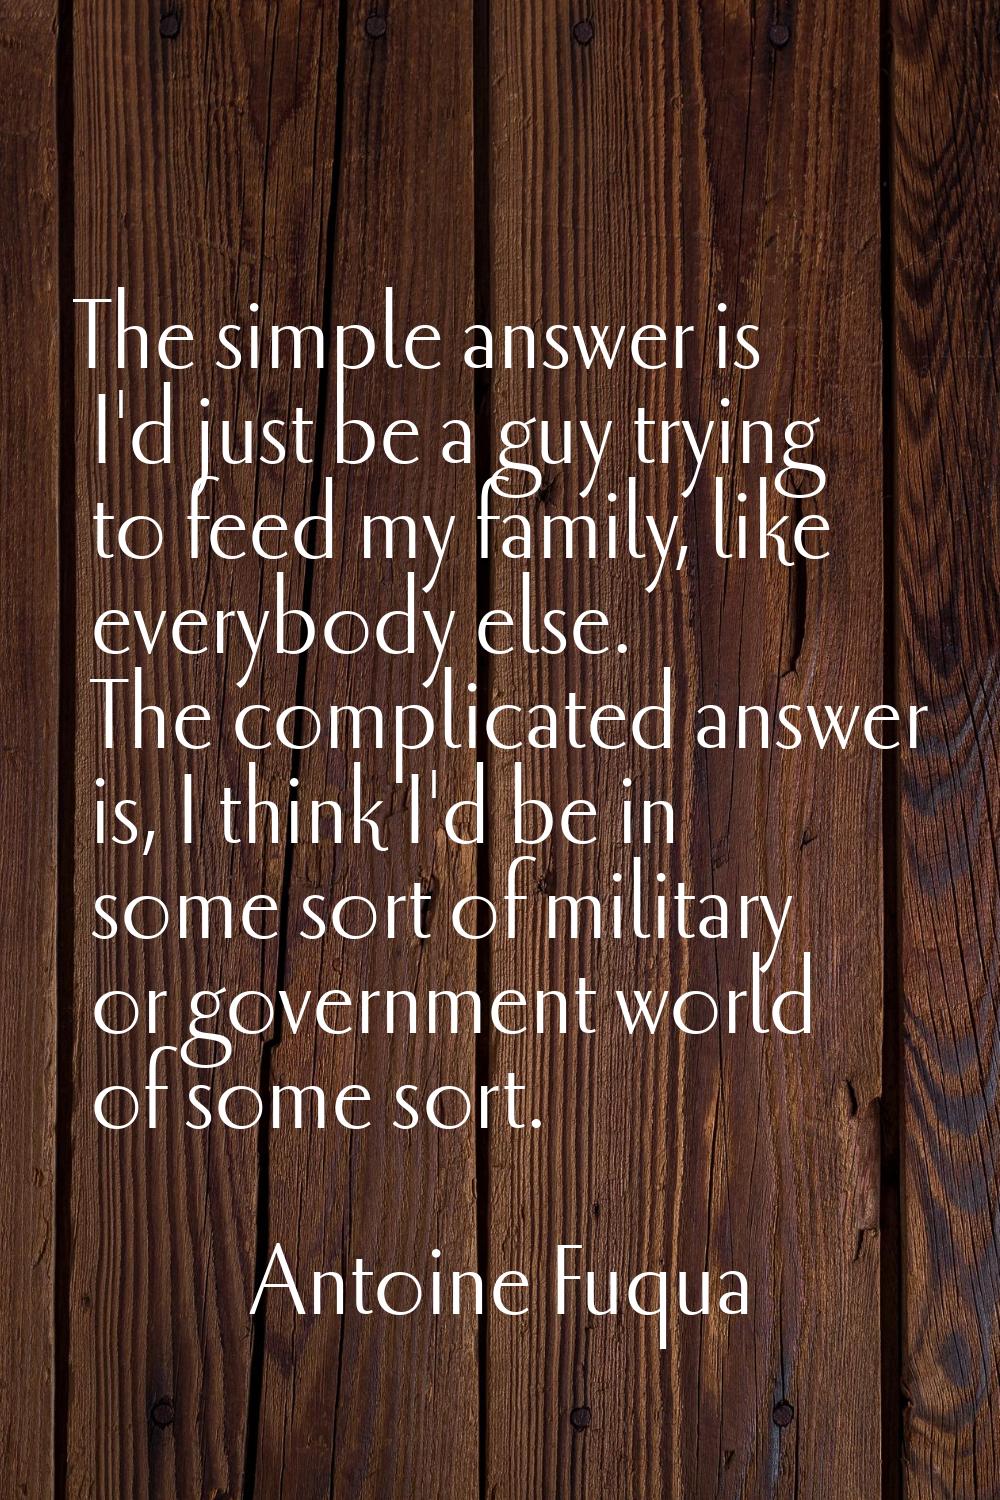 The simple answer is I'd just be a guy trying to feed my family, like everybody else. The complicat